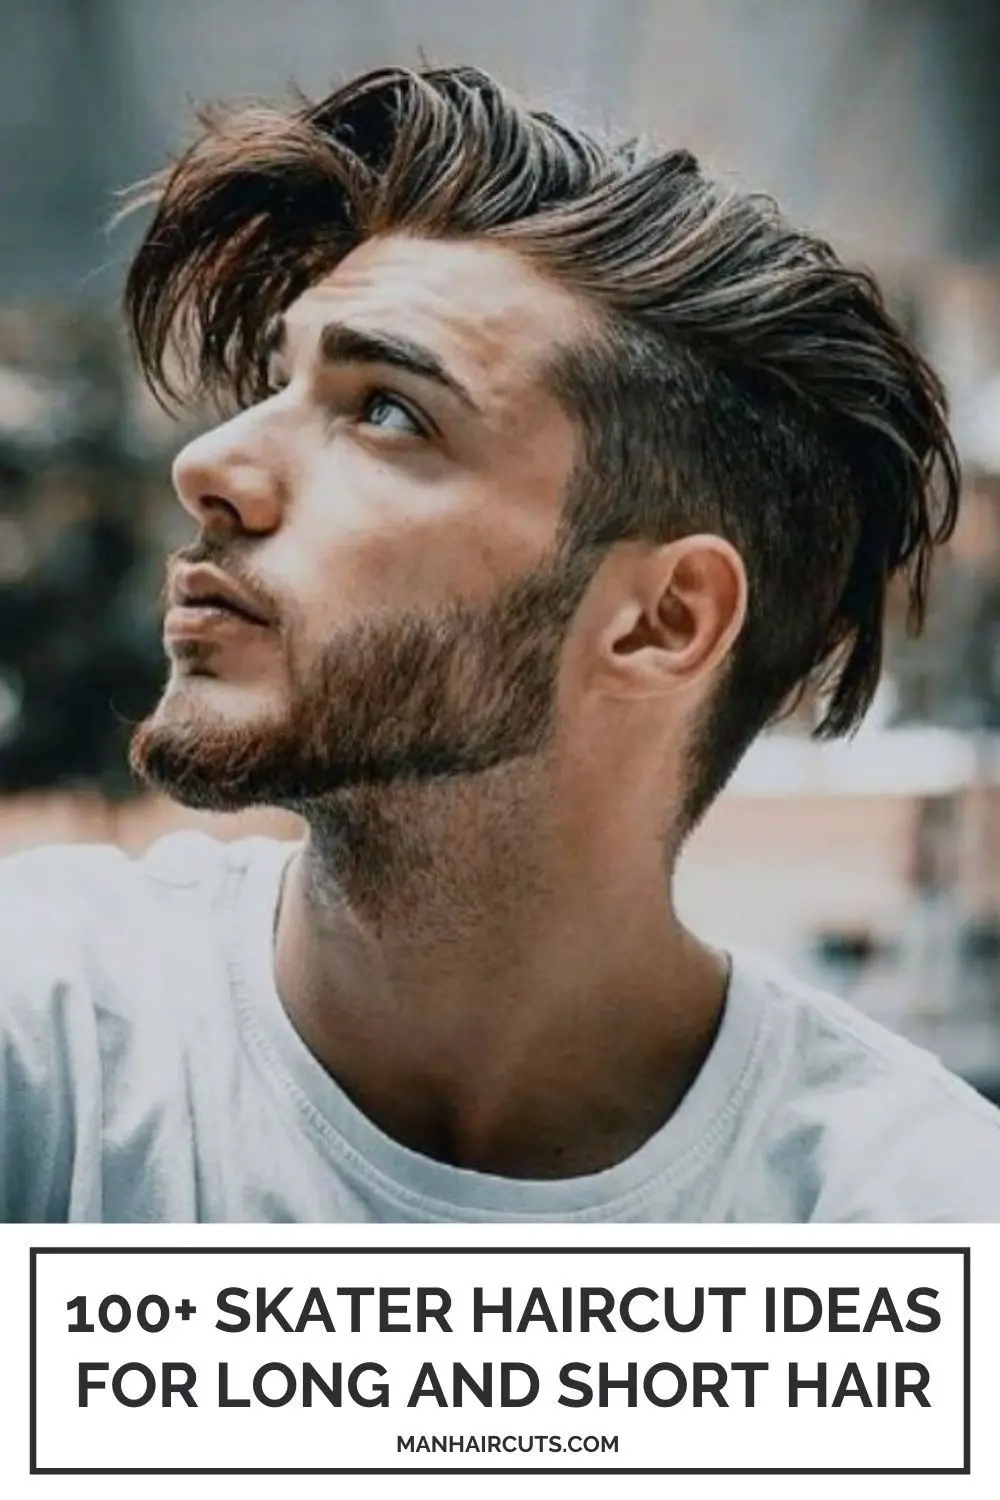 50-classic-side-part-haircuts-for-men-trending-this-year Side Swept Fringe